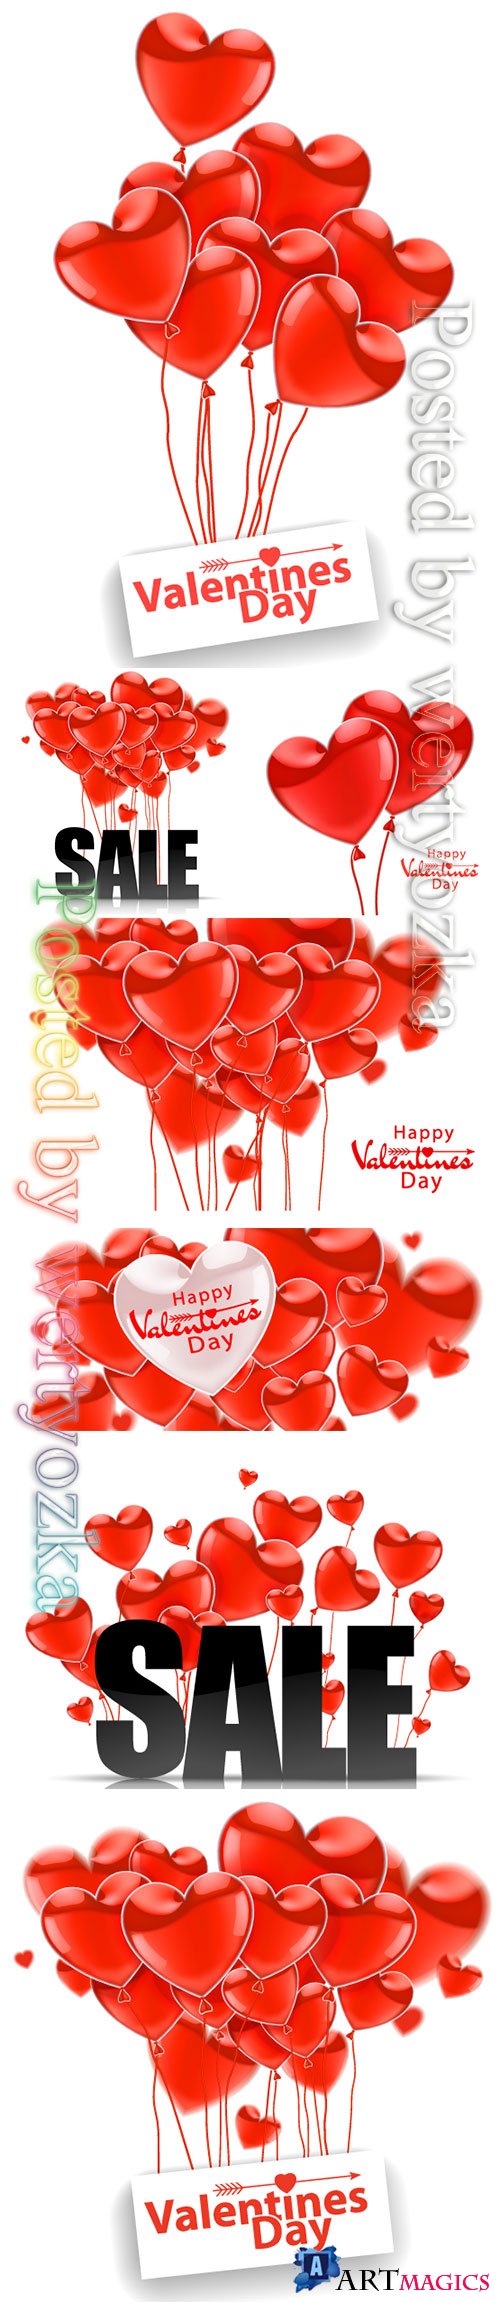 Happy Valentines Day, red flying realistic glossy balloons on a white background